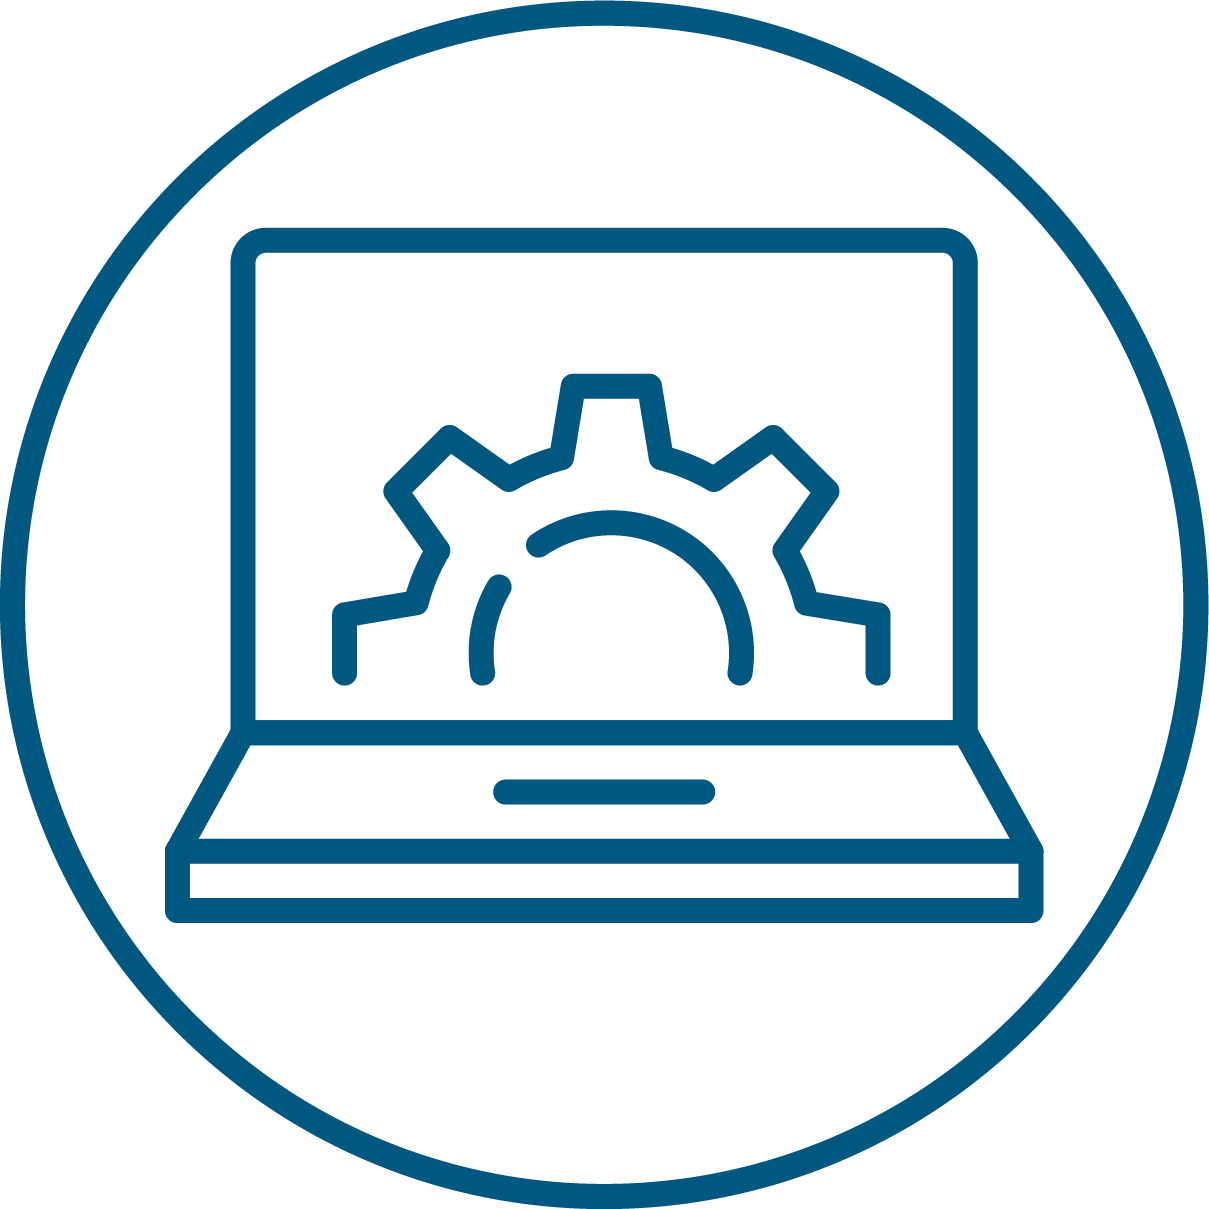 ICON_Tools-Workstations_FINAL.png